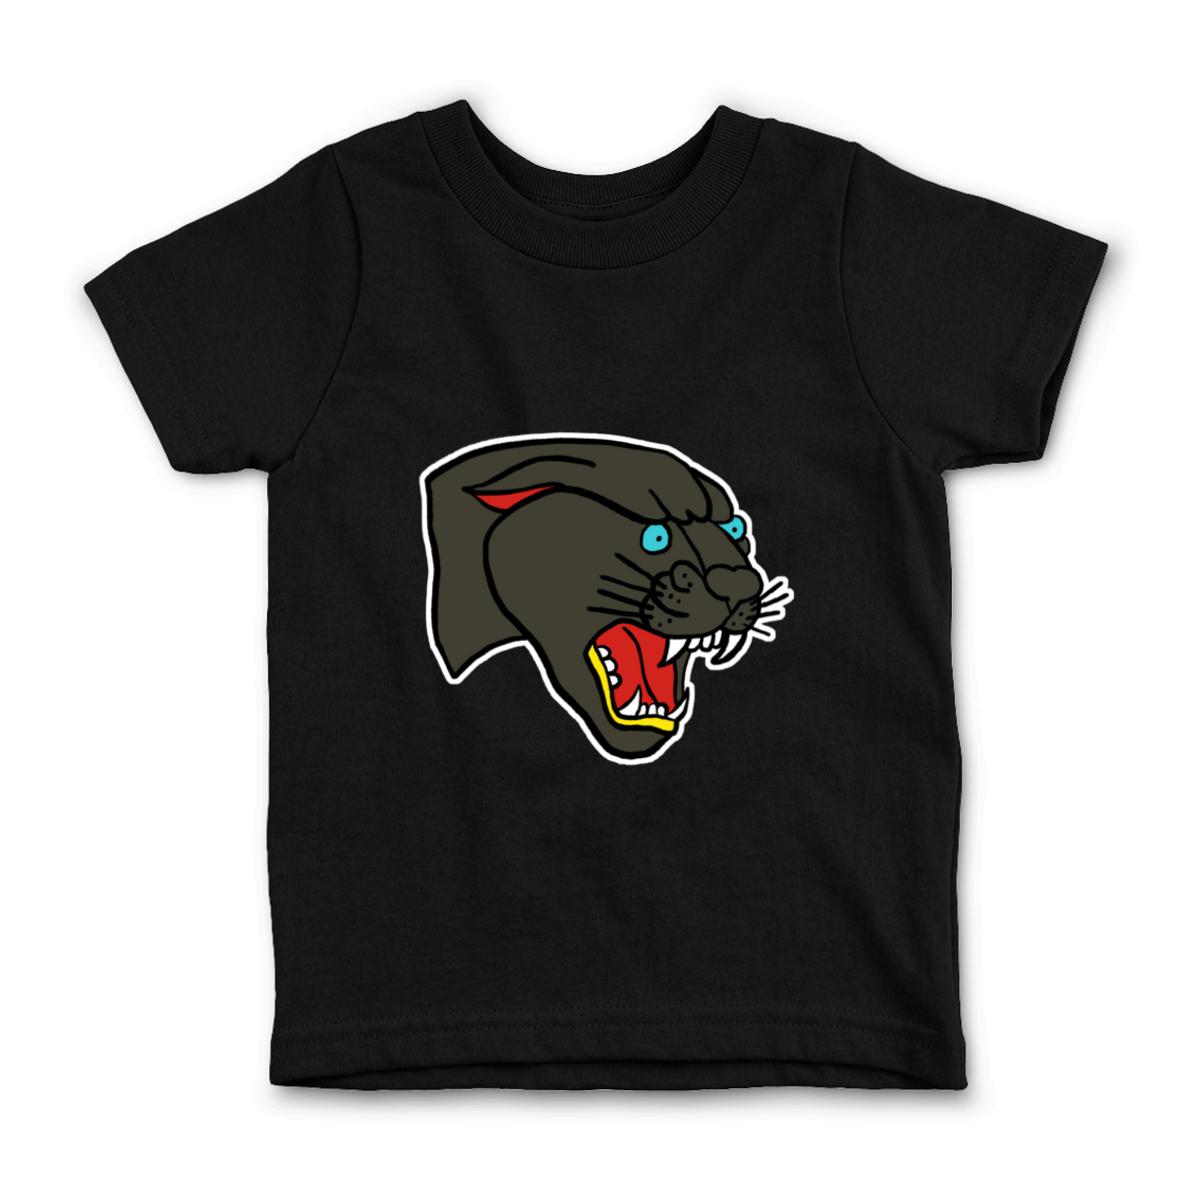 American Traditional Panther Kid's Tee Small black